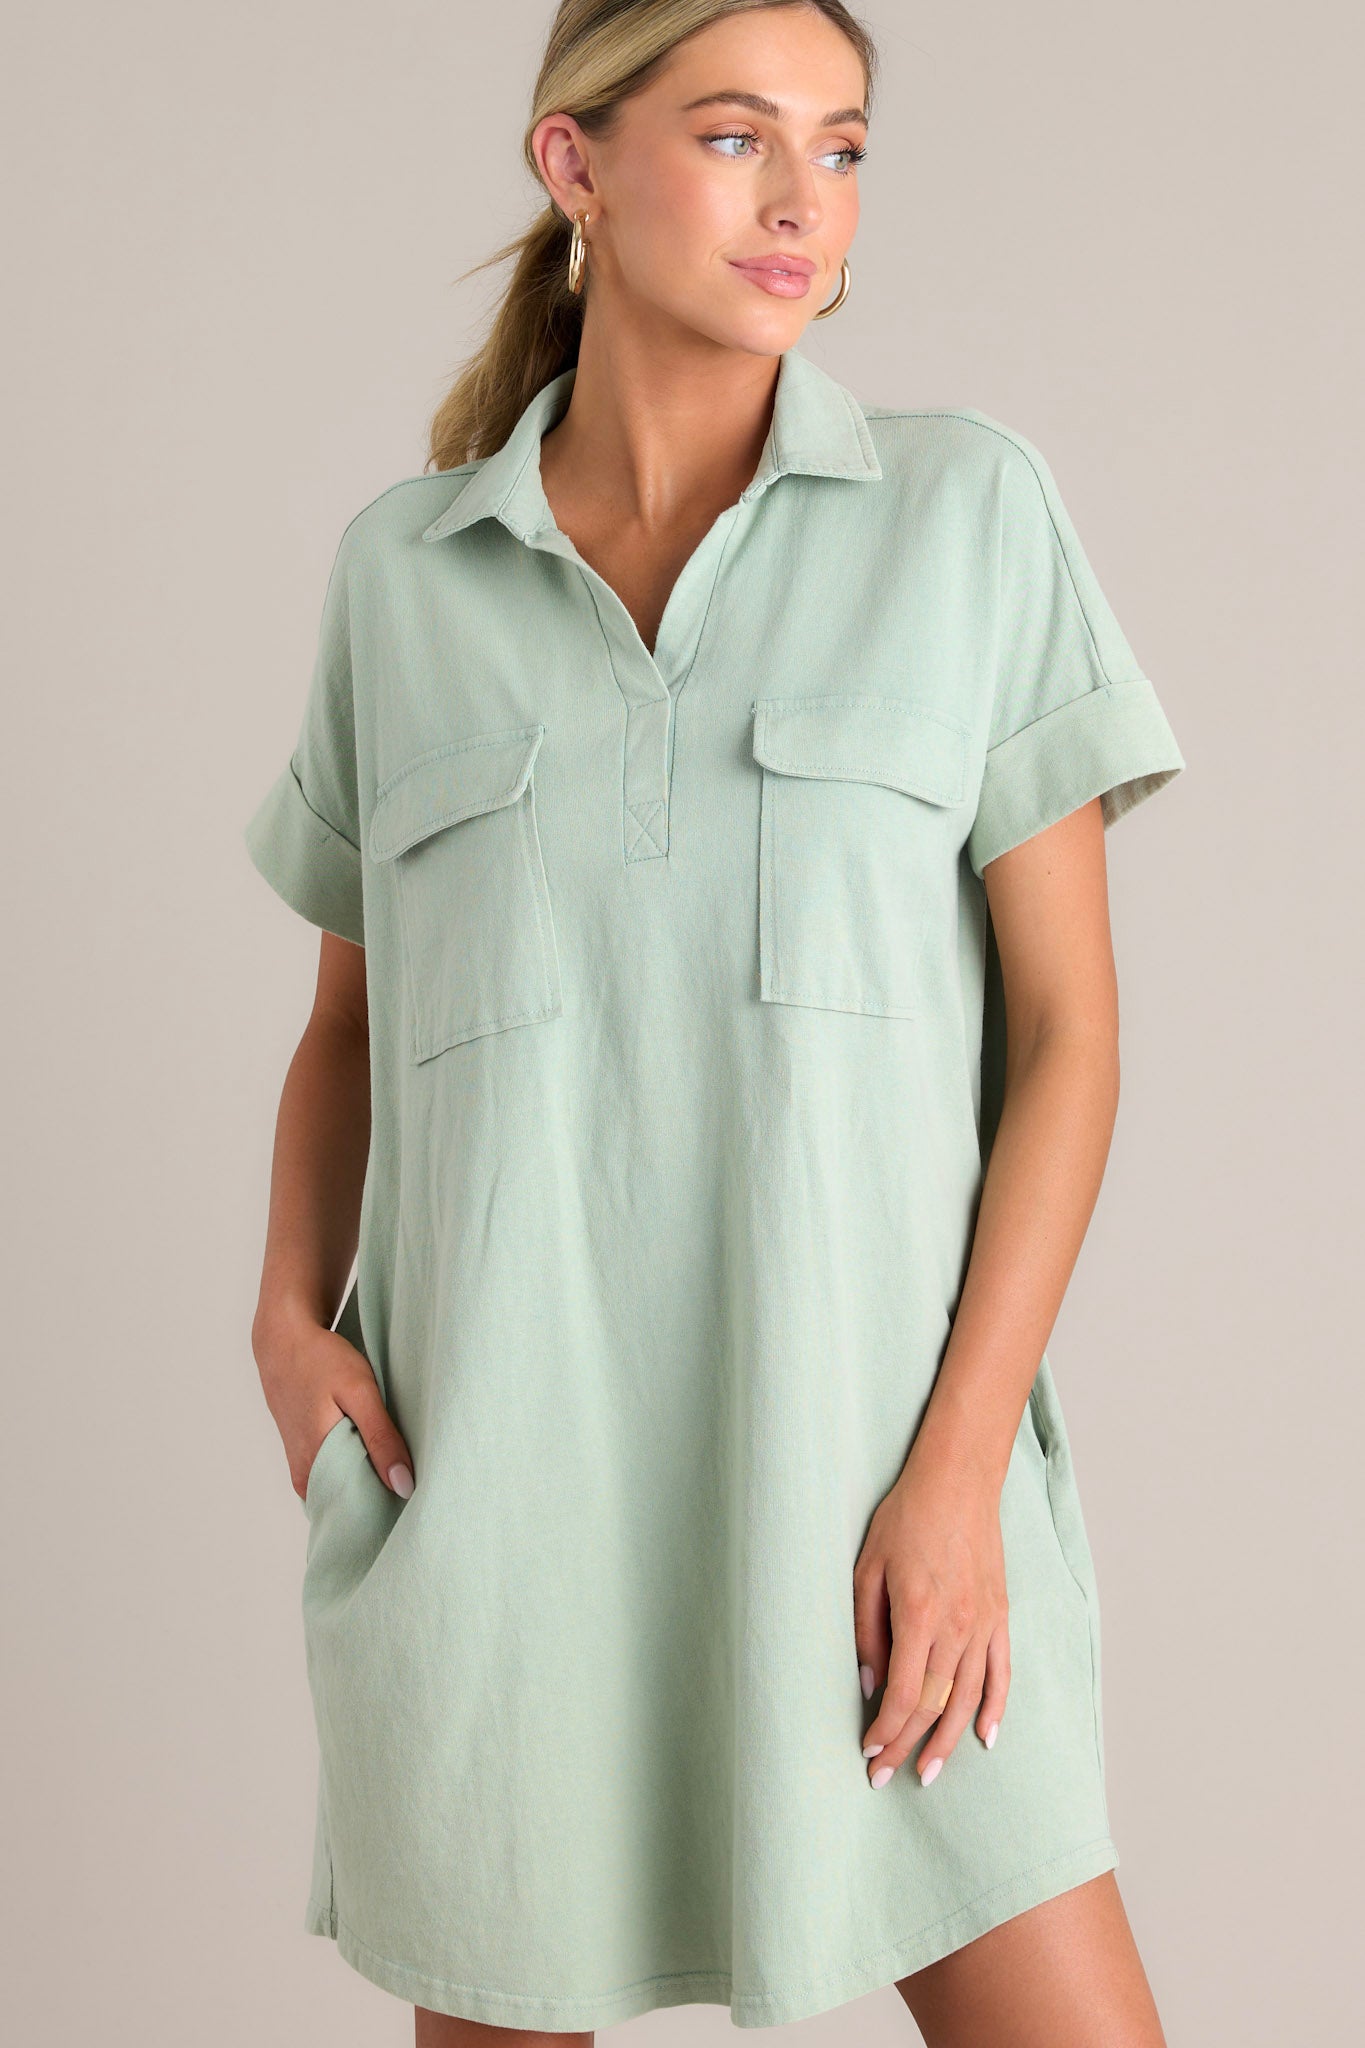 Angled view of a sage green mini dress featuring a collared neckline, functional breast and hip pockets, relaxed fit, and cuffed short sleeves.